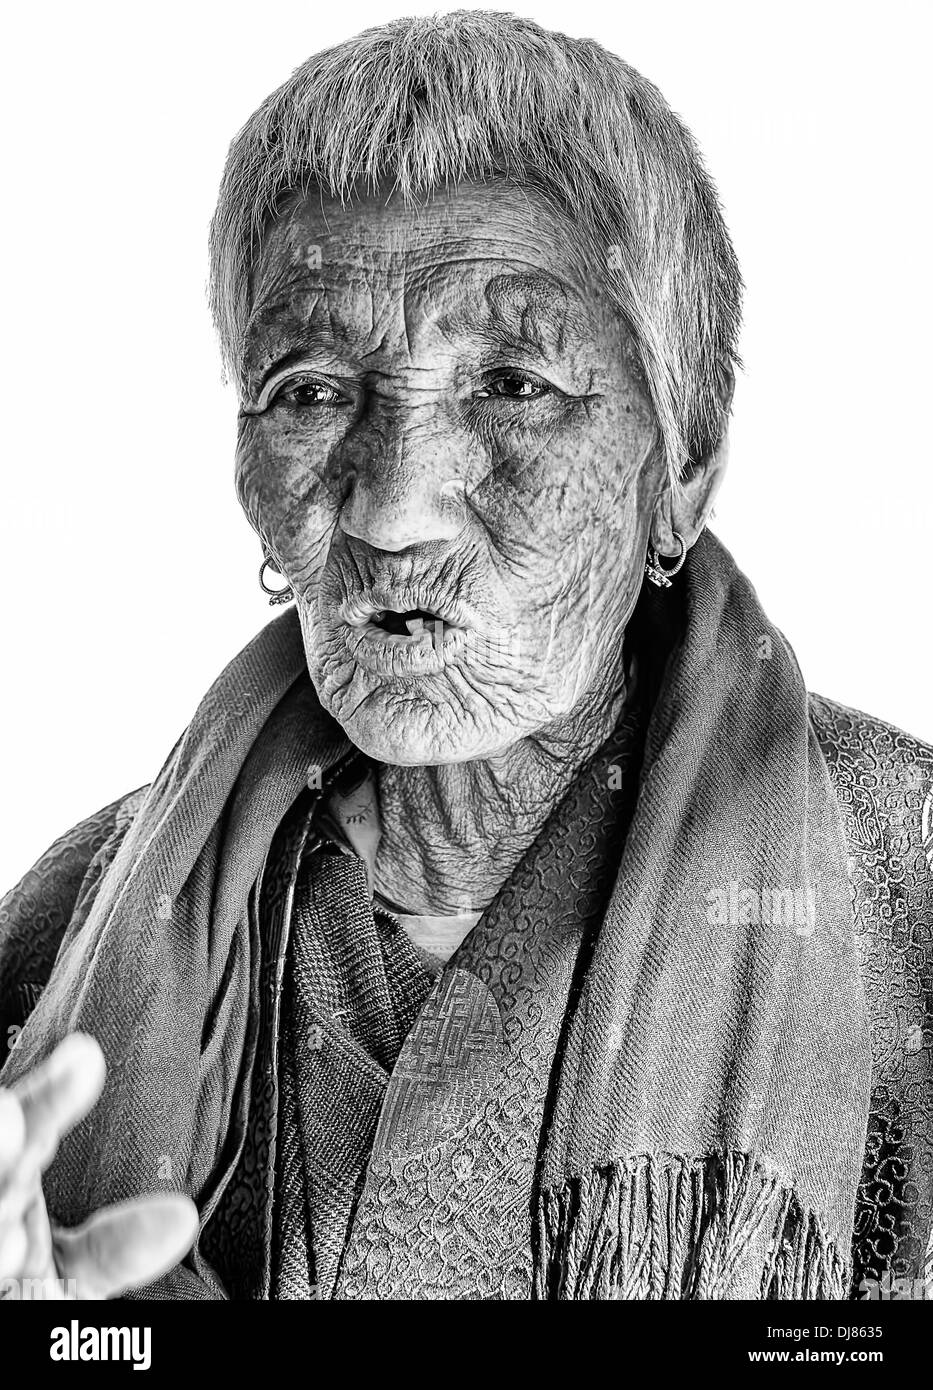 Bhutanese Old Lady in prayer dress isolated on white in black and white with copy space Stock Photo